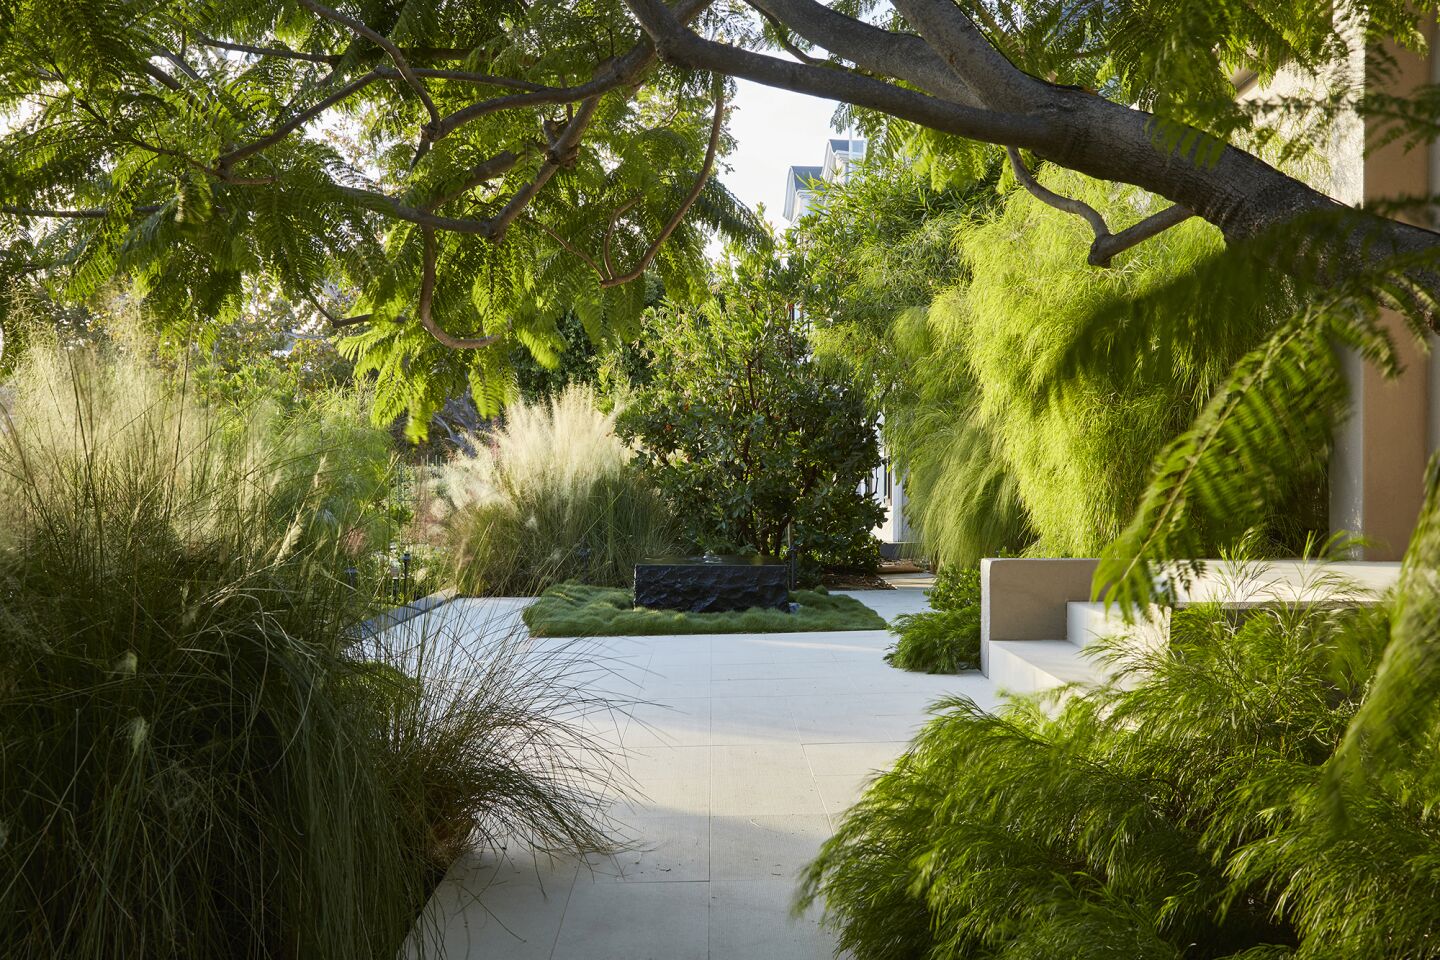 Foliage on the entry terrace glows in the sunlight and is set in motion by the slightest breeze. Careful grading and layout of landscape elements maximizes a feeling of spaciousness in this typical-sized rectangular lot.